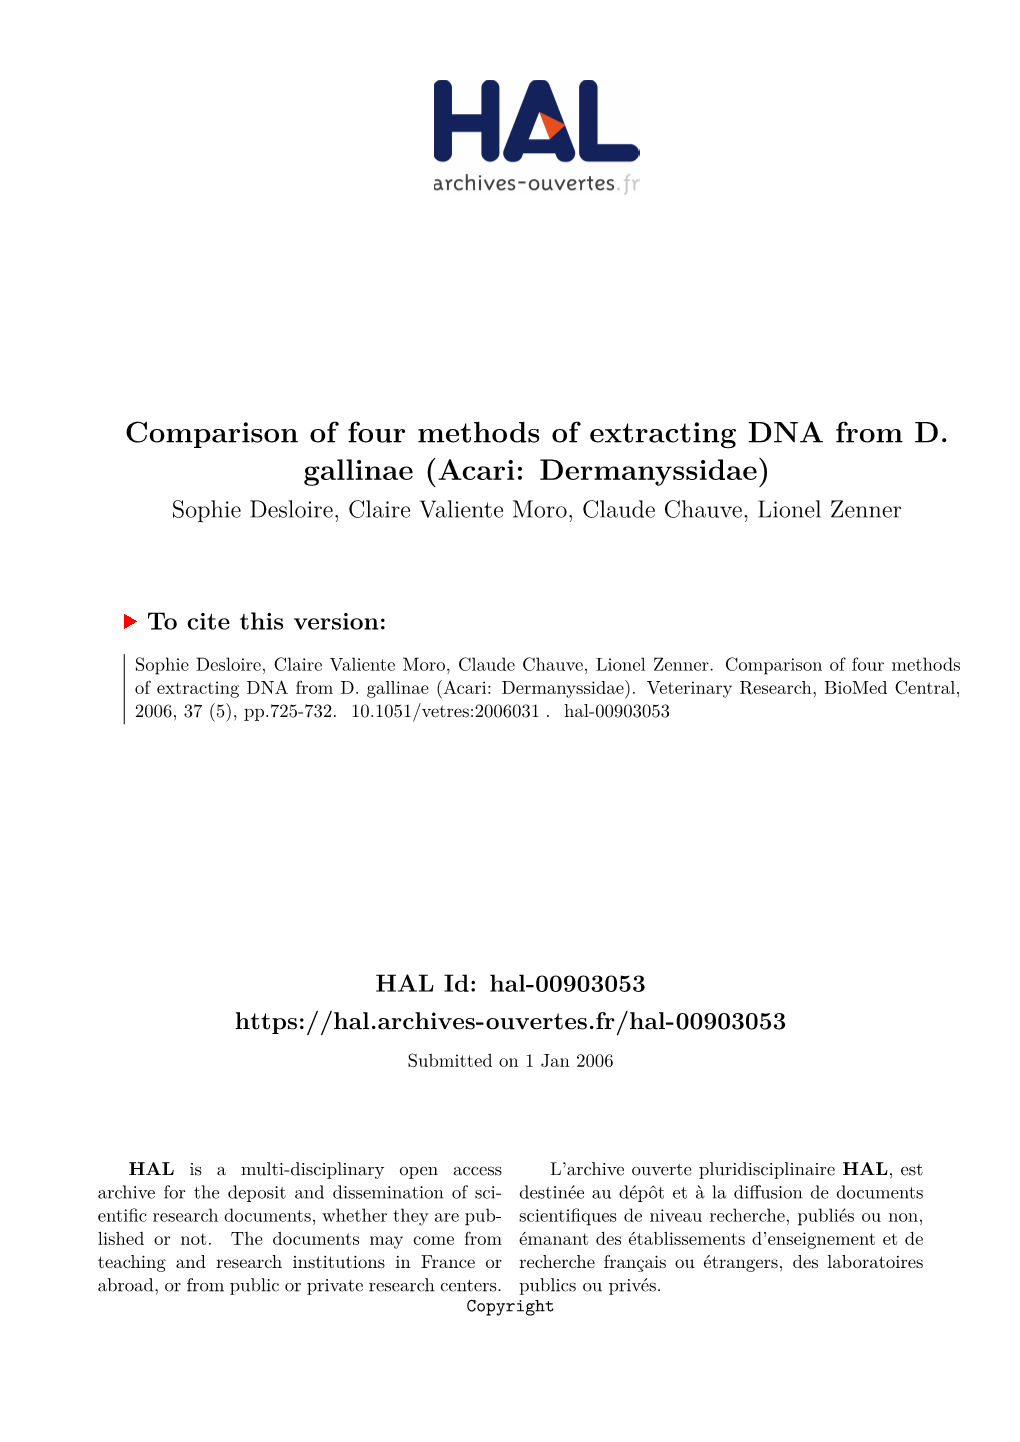 Comparison of Four Methods of Extracting DNA from D